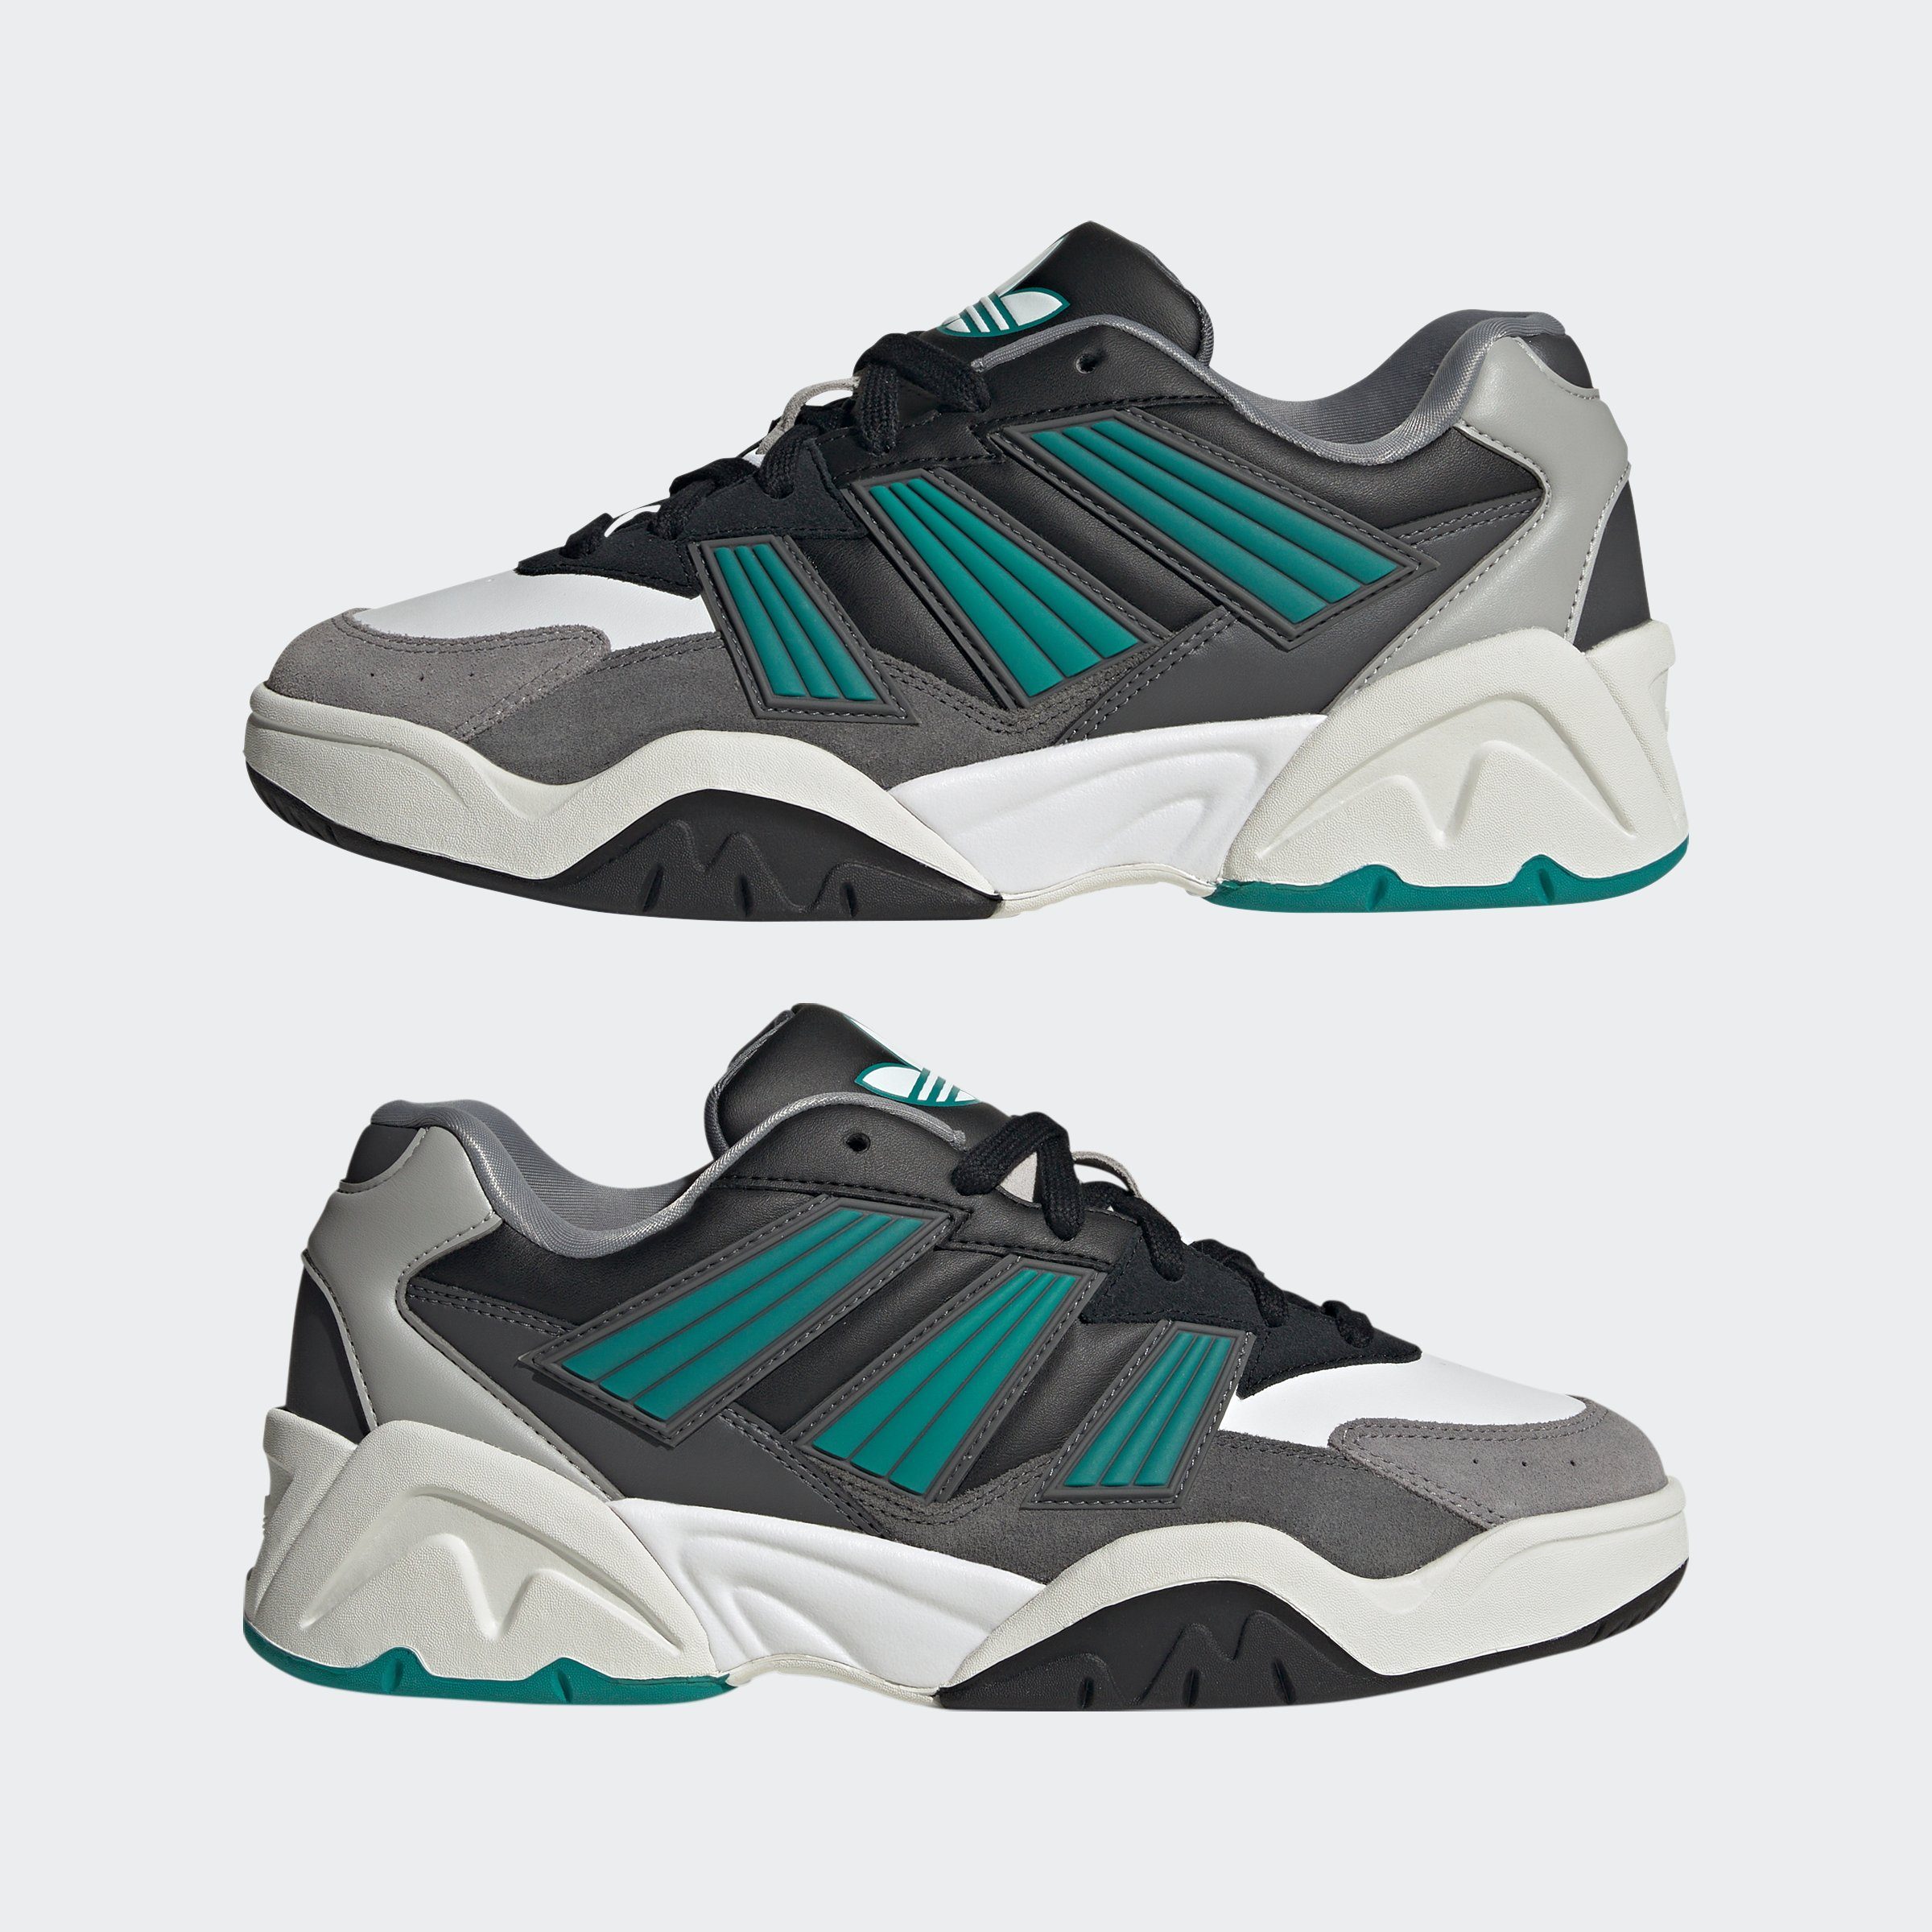 adidas Eqt Cloud Crystal / White / White Green Originals COURT MAGNETIC Sneaker